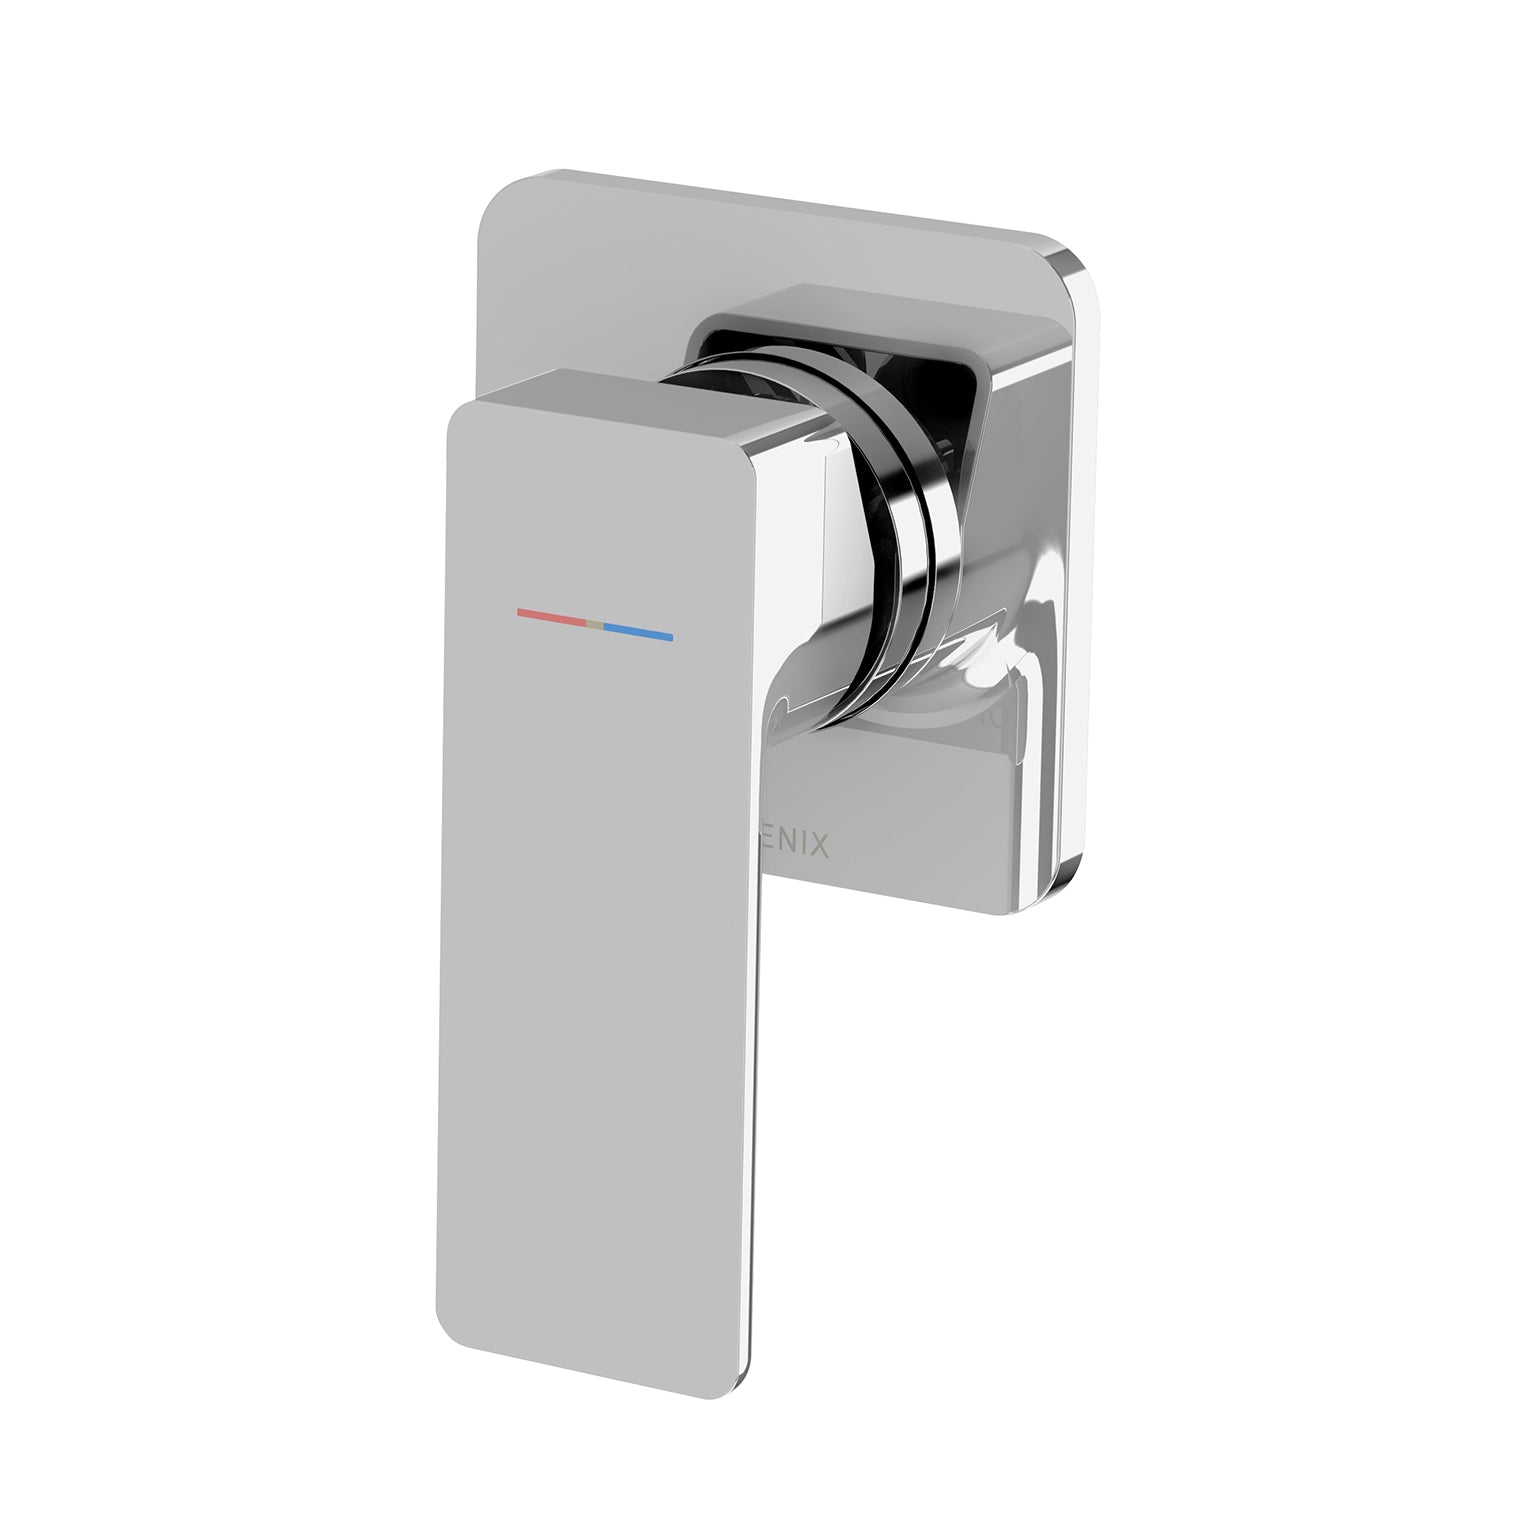 PHOENIX GLOSS MKII SWITCHMIX SHOWER / WALL MIXER FIT-OFF AND ROUGH-IN KIT CHROME